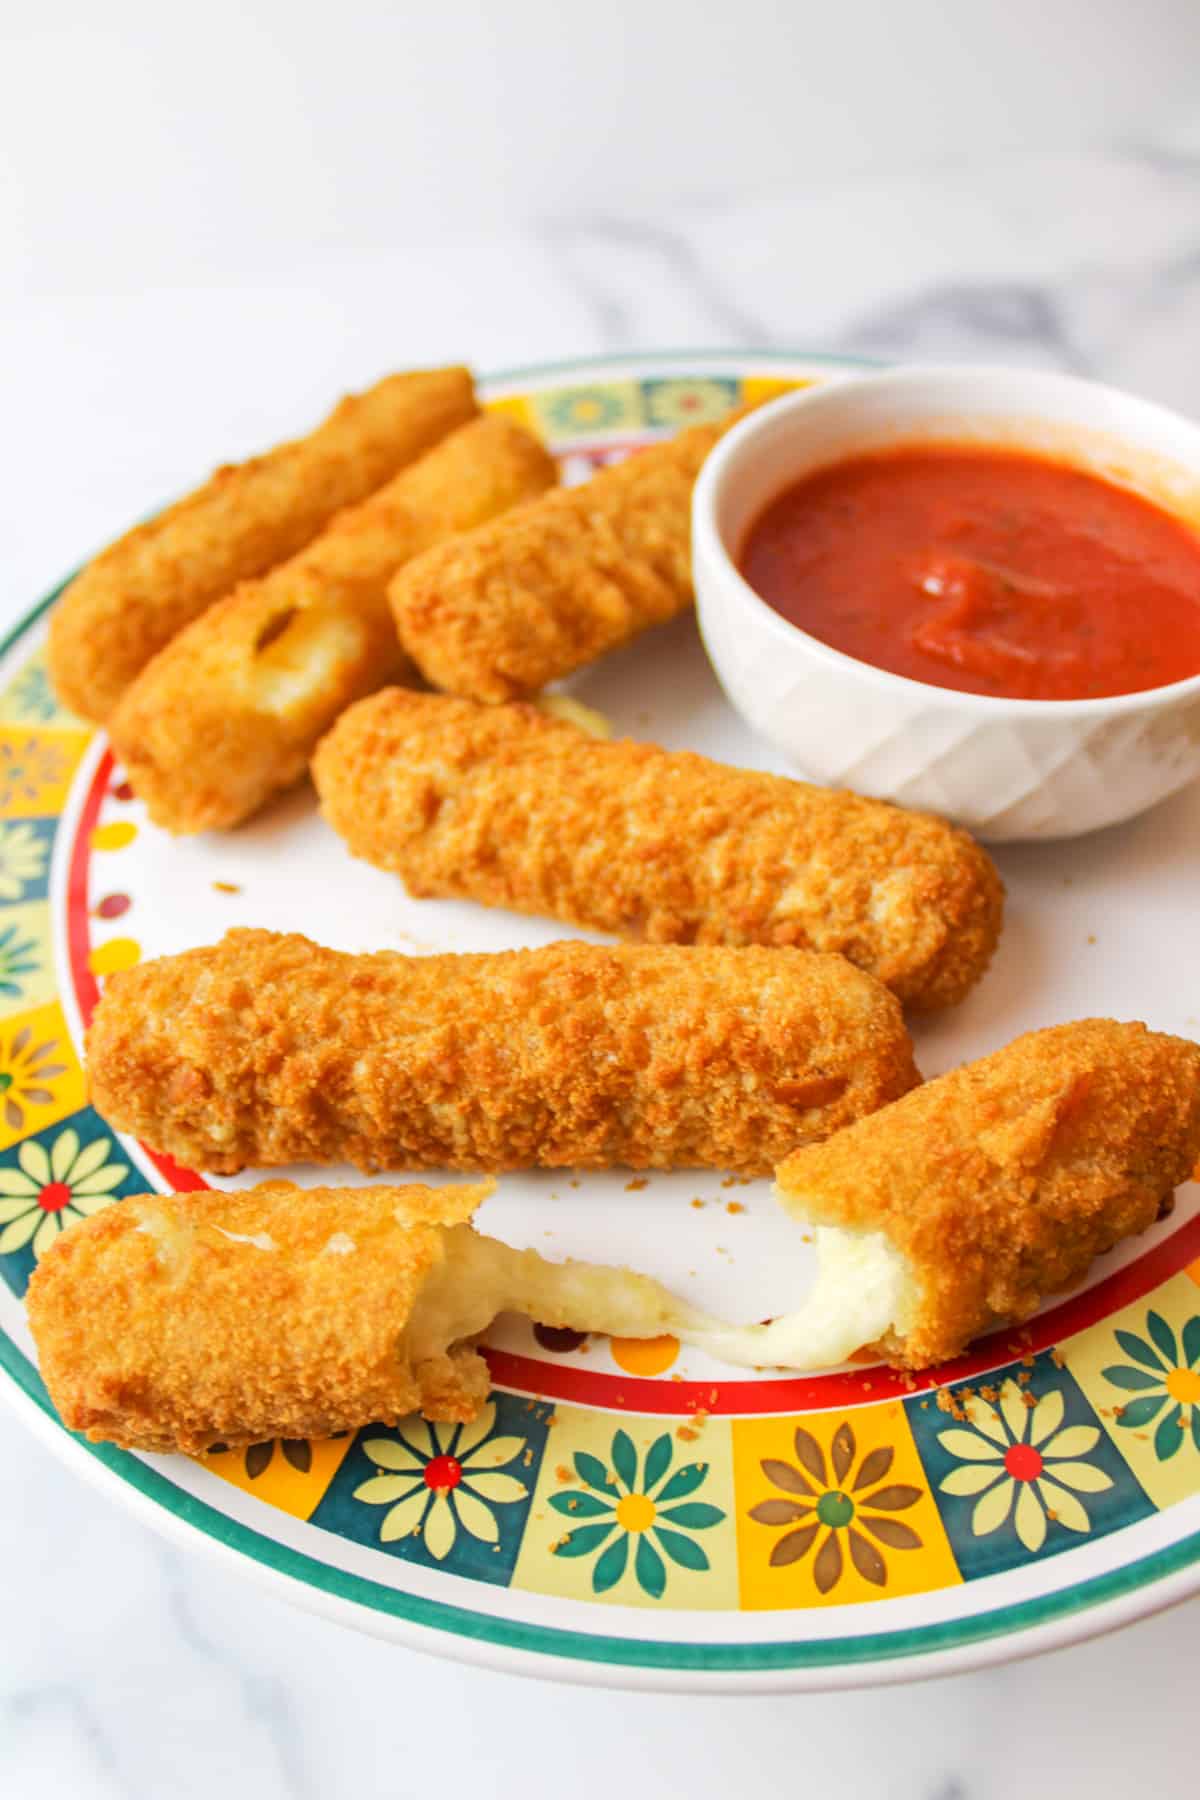 a plate of mozzarella sticks next to a bowl of sauce one mozzarella stick is broken in half to reveal stringy cheese inside